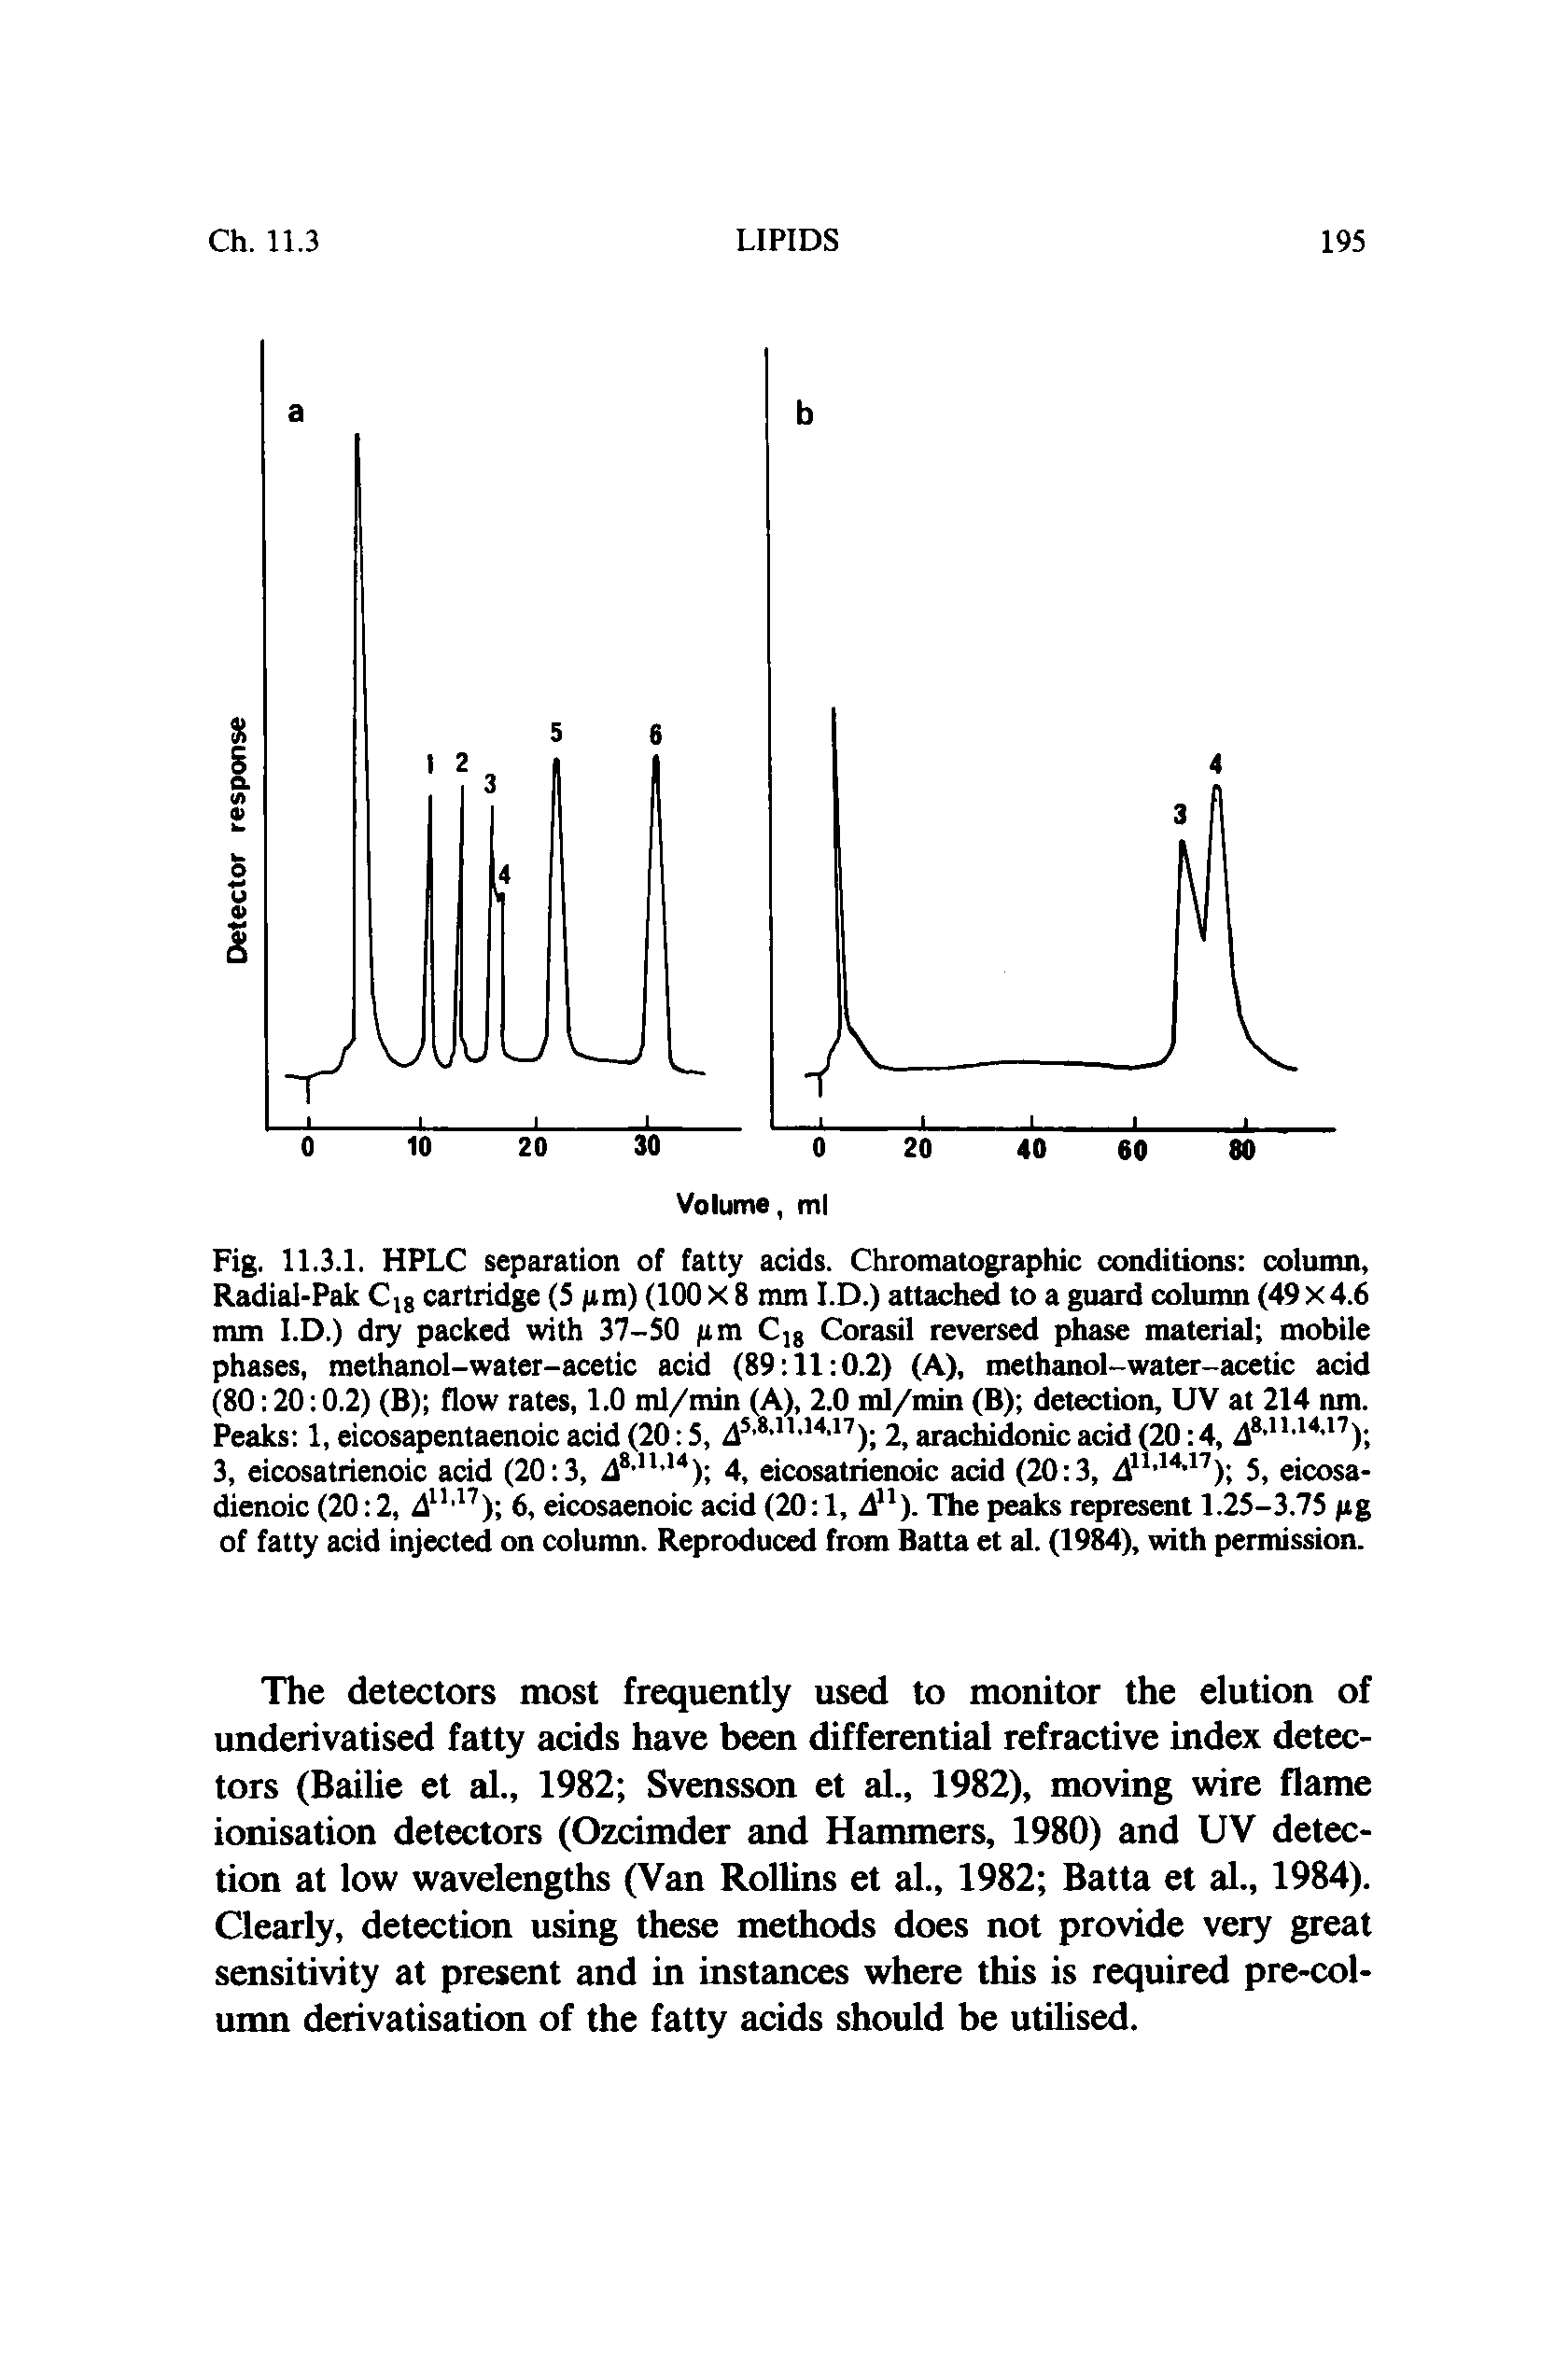 Fig. 11.3.1. HPLC separation of fatty acids. Chromatographic conditions column, Radial-Pak Cjg cartridge (5 jam) (100x8 mm I.D.) attached to a guard column (49x4.6 mm I.D.) dry packed with 37-SO /am C]g Corasil reversed phase material mobile phases, methanol-water-acetic acid (89 11 0.2) (A), methanol-water-acetic acid (80 20 0.2) (B) flow rates, 1.0 ml/min (A), 2.0 ml/min (B) detection, UV at 214 nm. Peaks 1, eicosapentaenoic acid (20 5, 2 aracUdonic acid (20 4,...